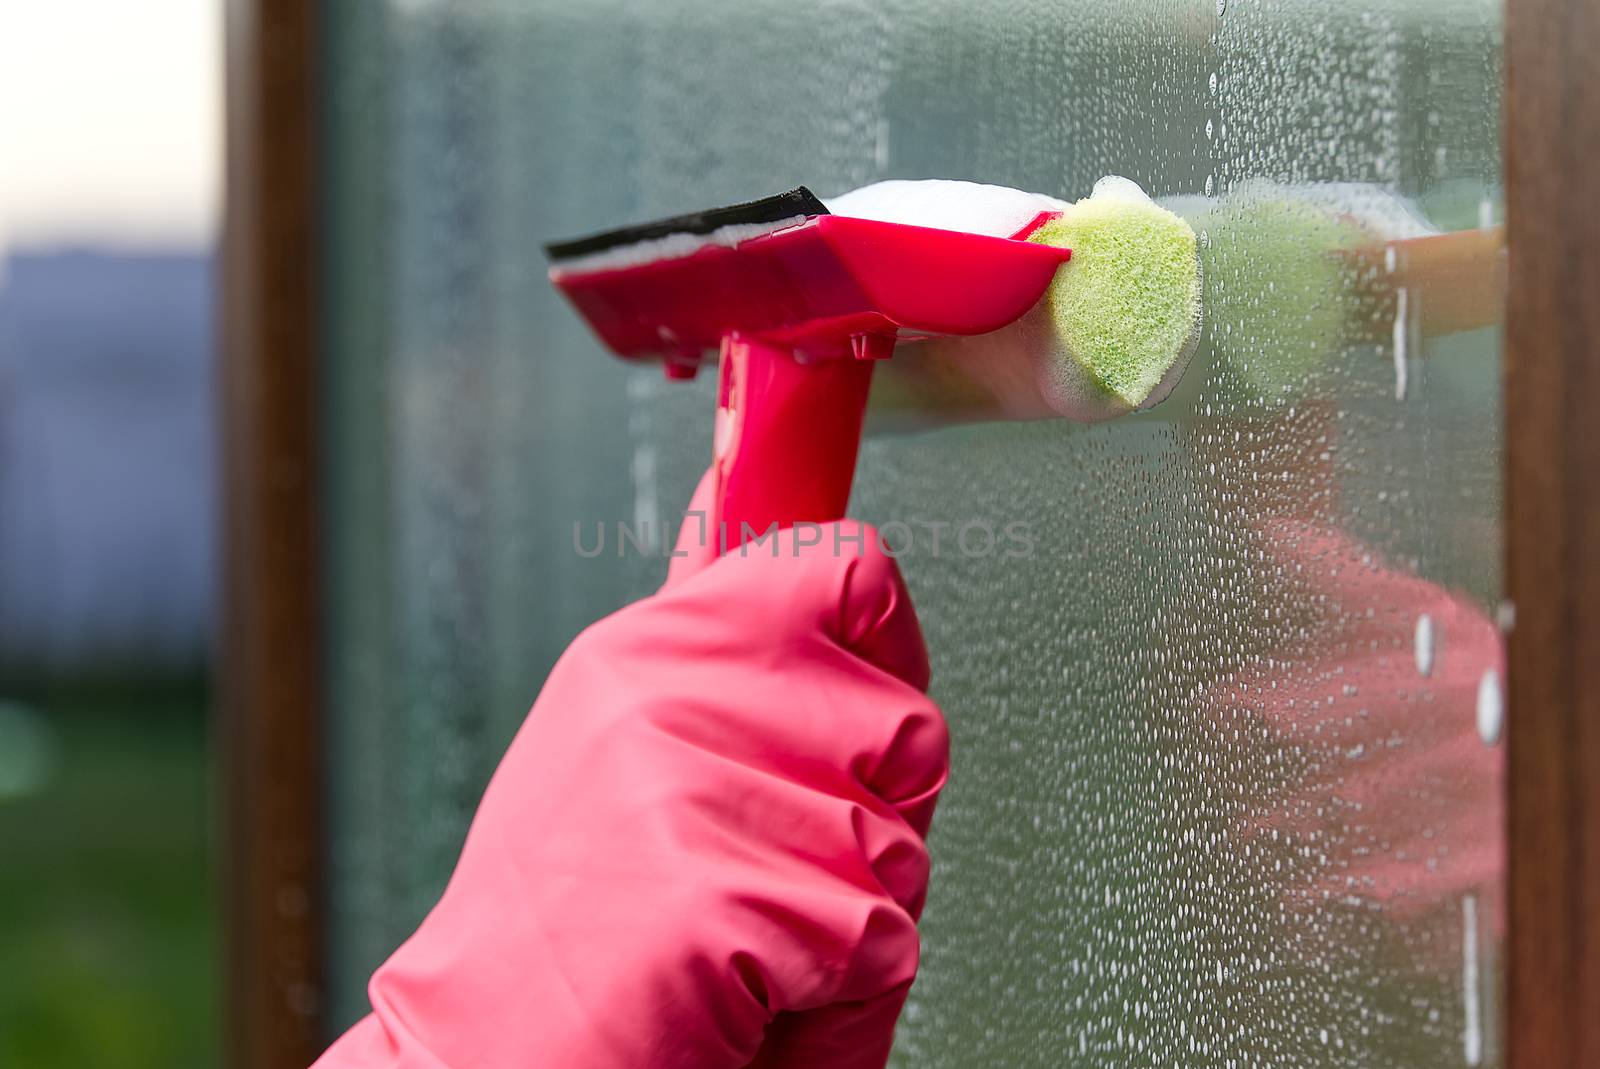 window cleaning. A woman in pink rubber gloves washes a window in a house. Happy Woman In Gloves Cleaning Window. Concept for home cleaning services by PhotoTime